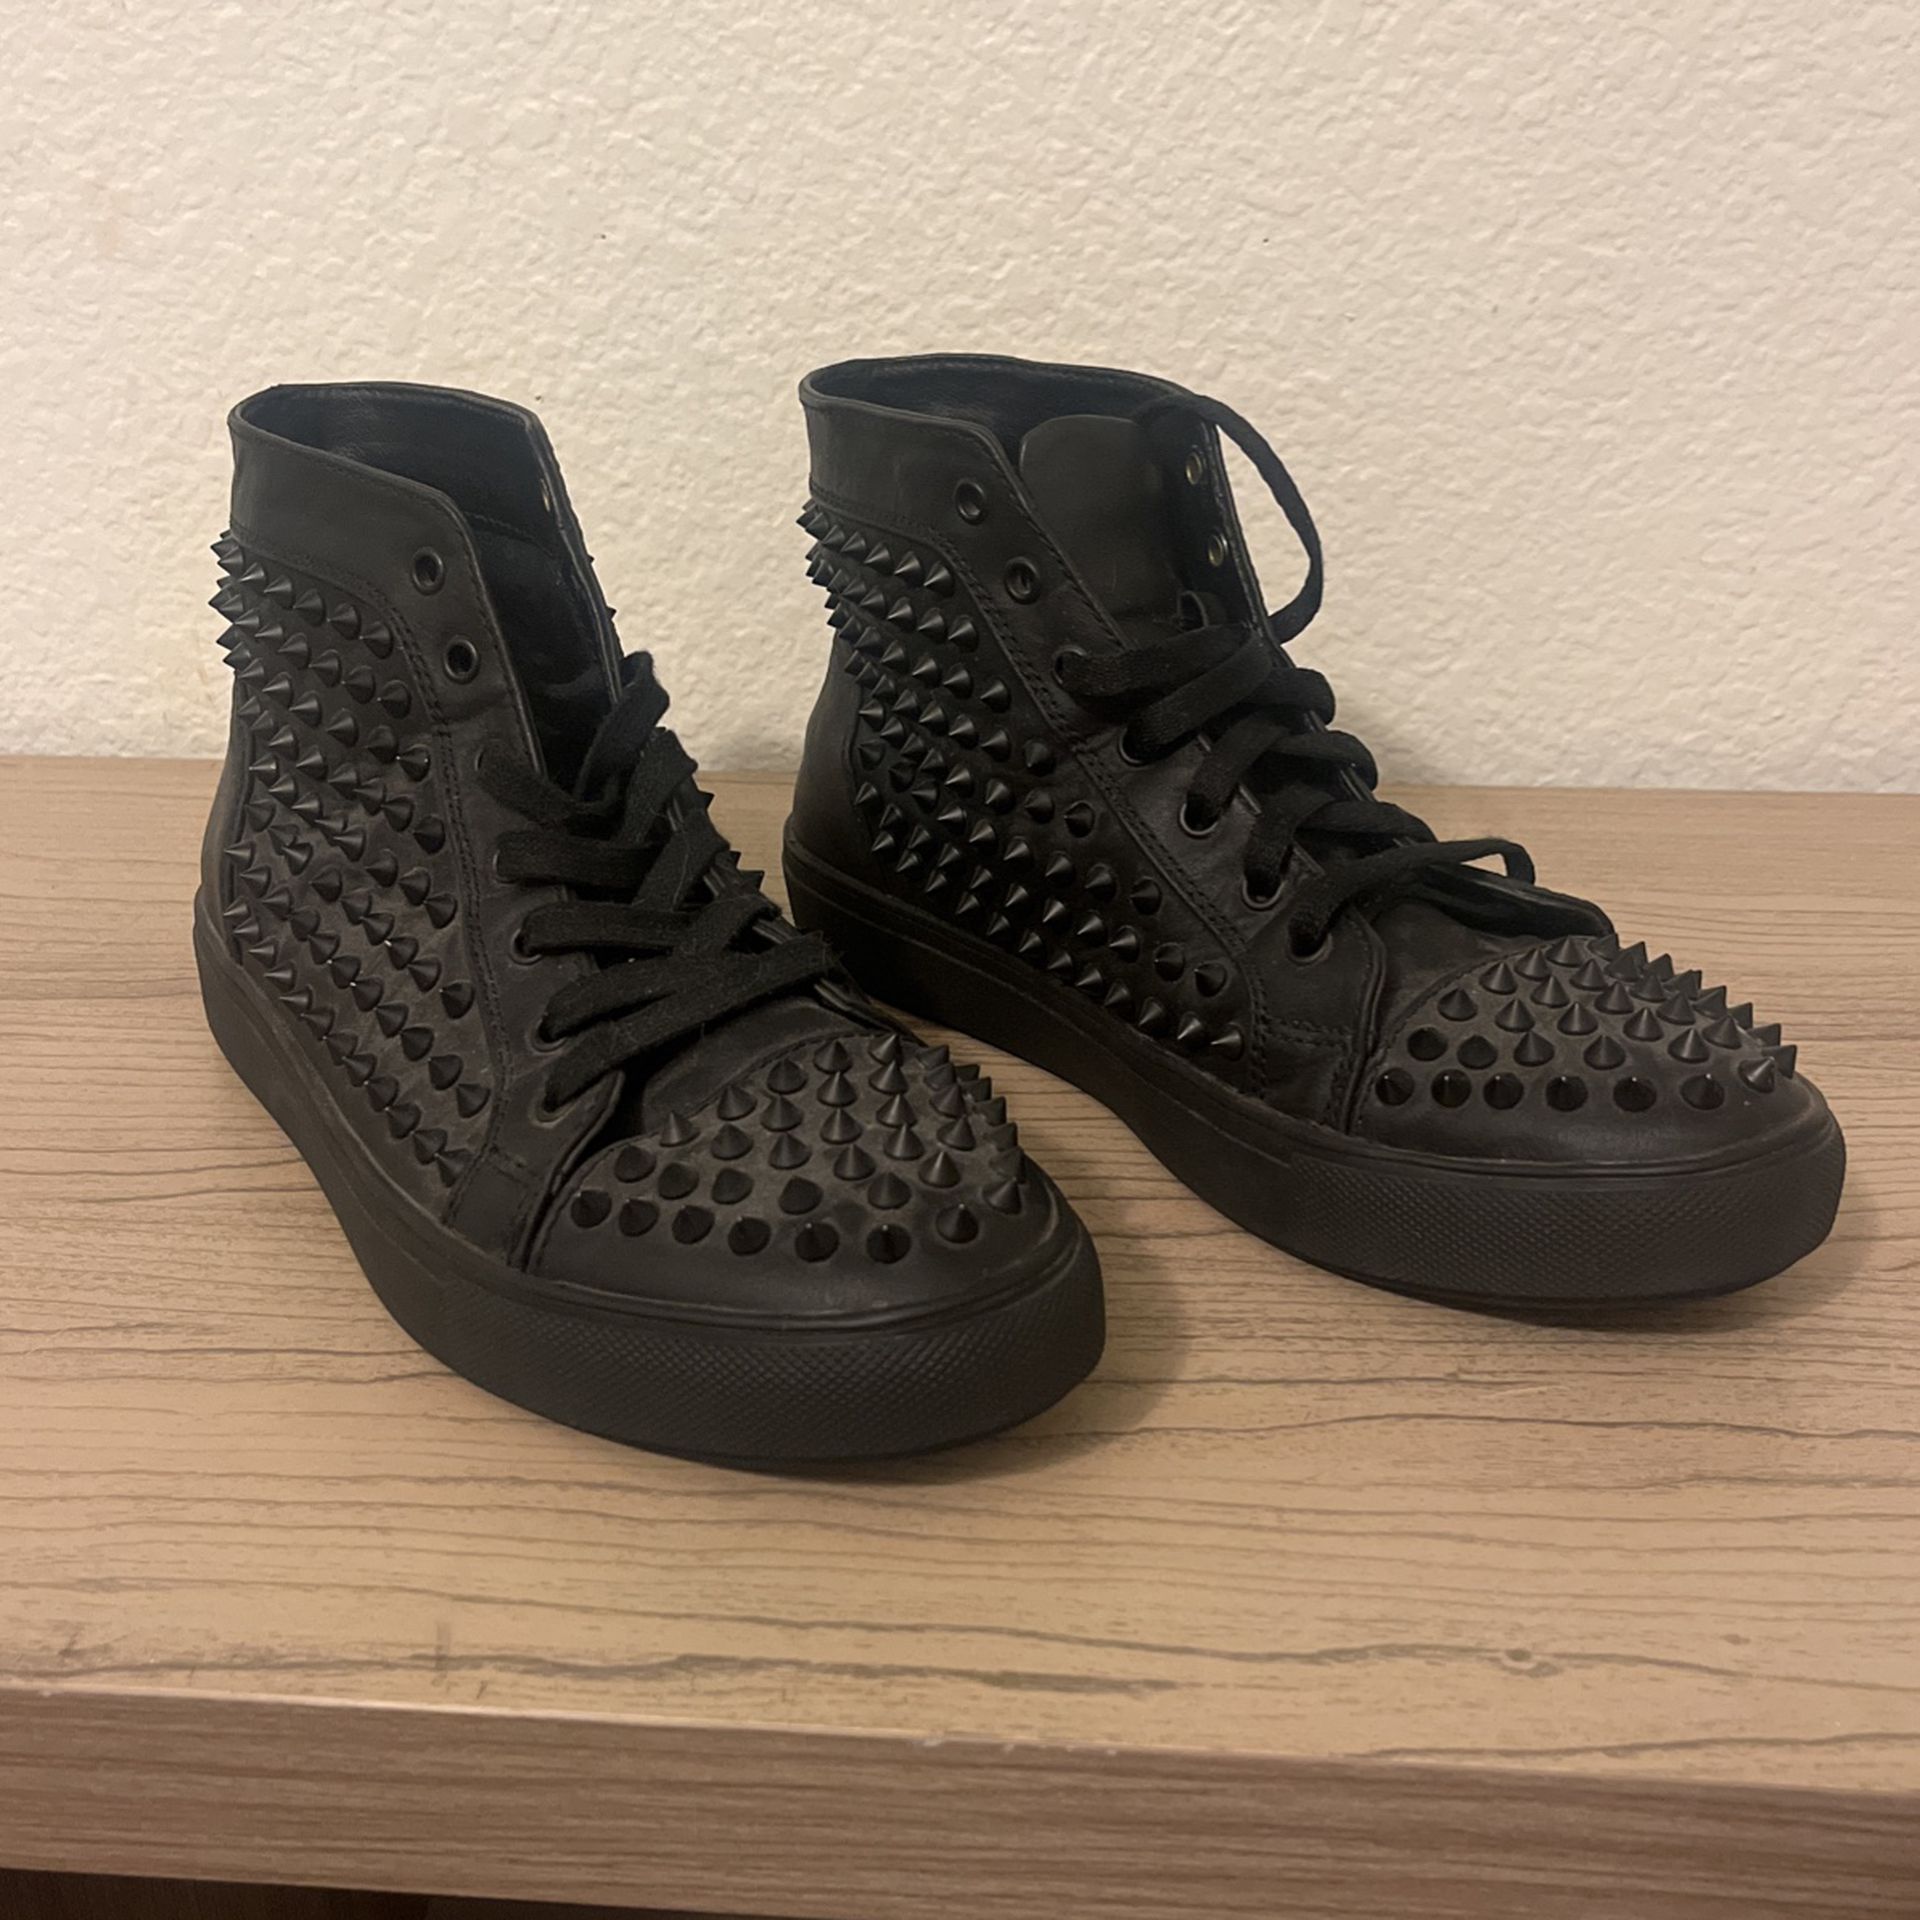 Tops Steve Spike Shoes for Sale in Henderson, NV - OfferUp